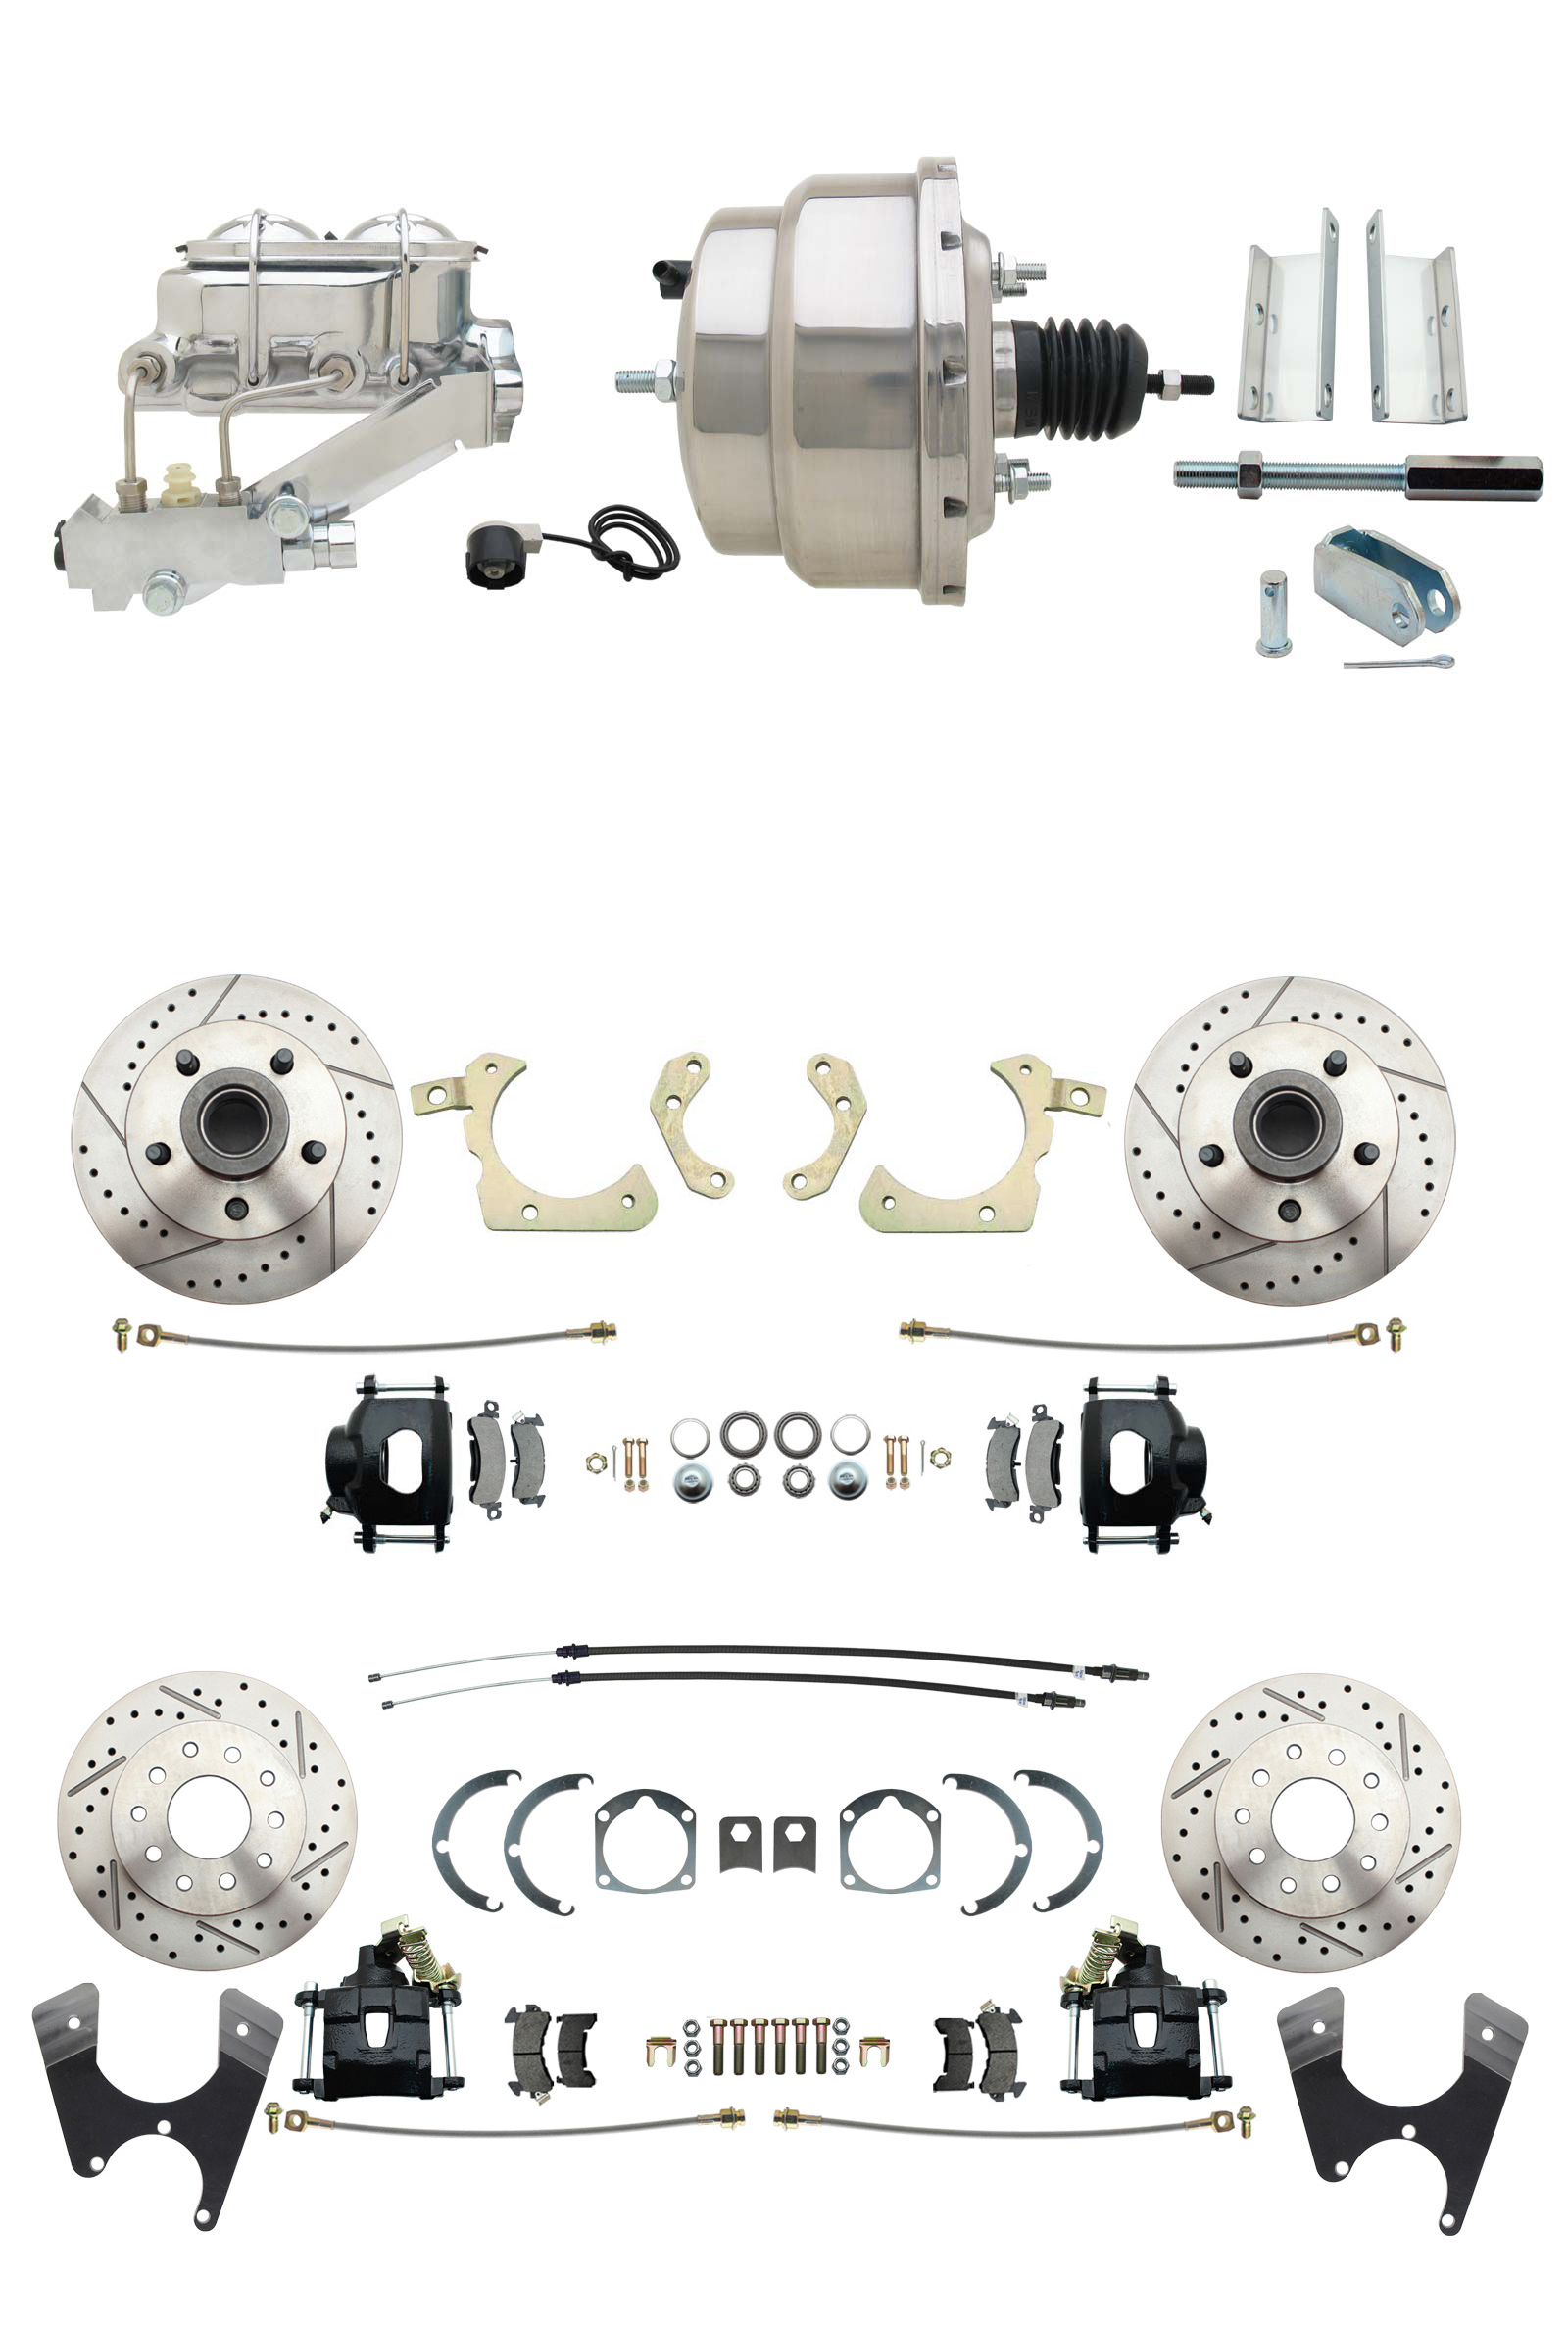 1955-1958 GM Full Size Front & Rear Power Disc Brake Kit Black Powder Coated Calipers Drilled/Slotted Rotors (Impala, Bel Air, Biscayne) & 8 Dual Chrome Booster Conversion Kit W/ Chrome Master Cylinder Left Mount Disc/